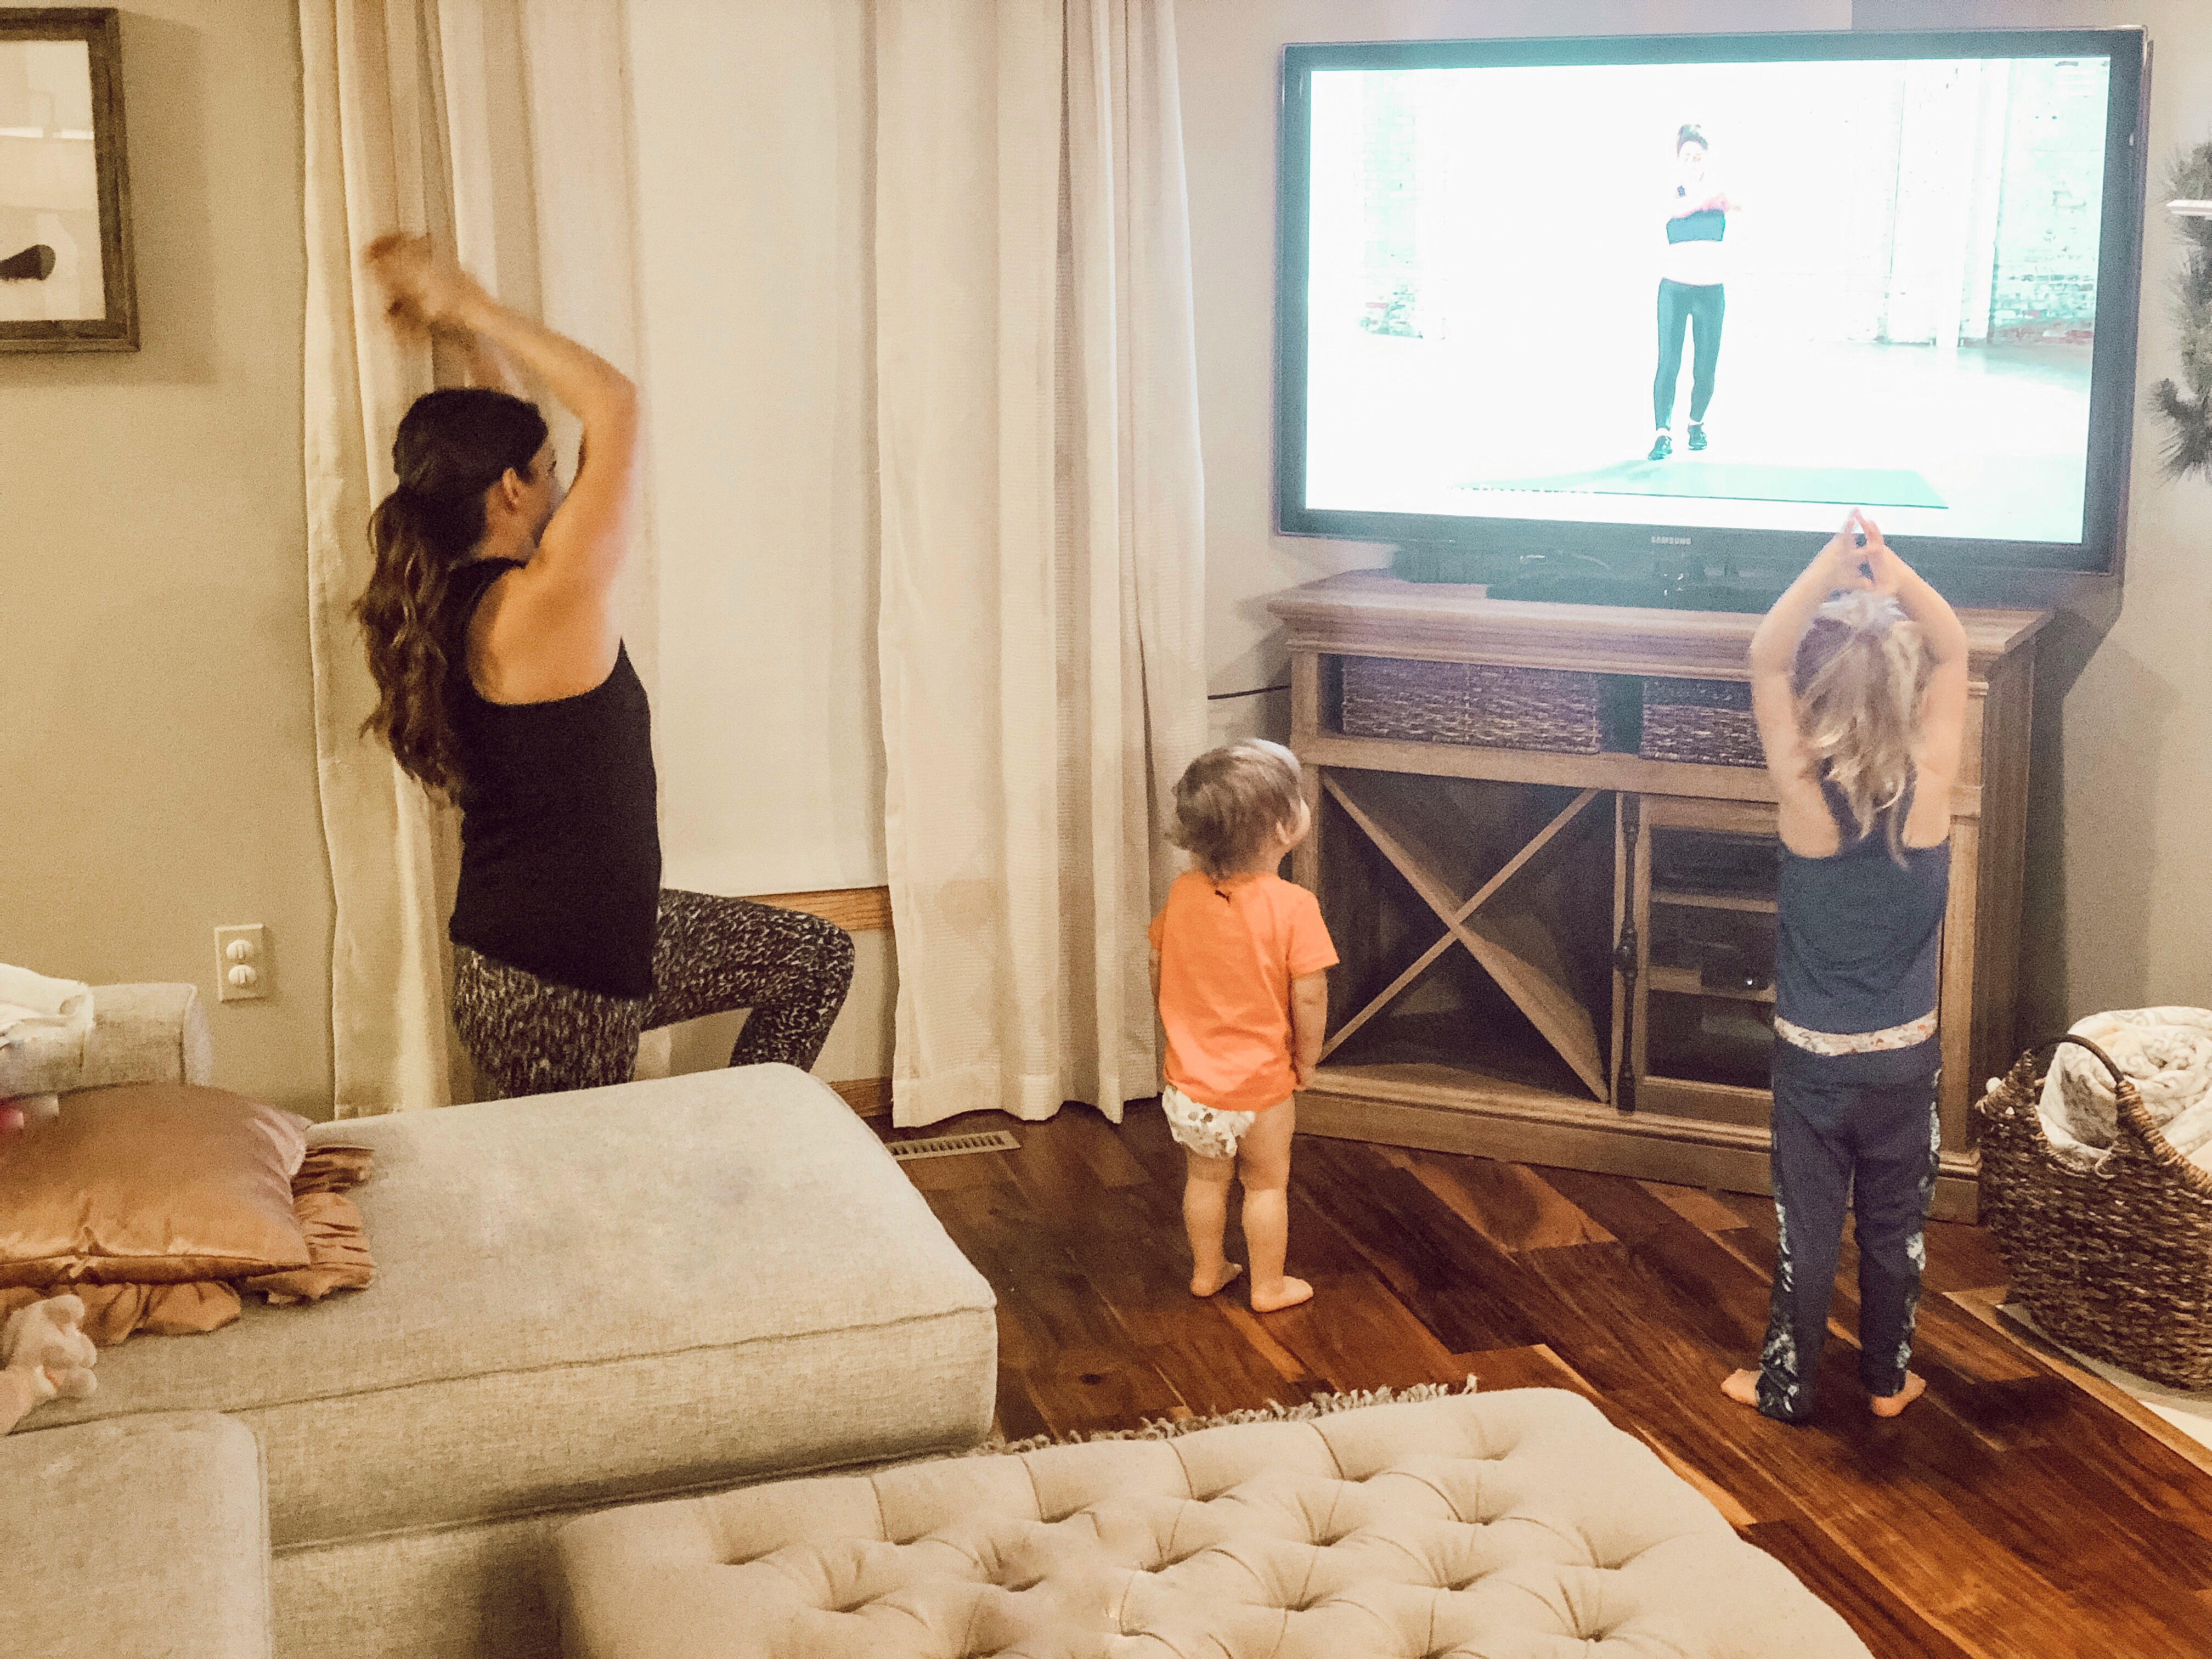 HIIT family workout 